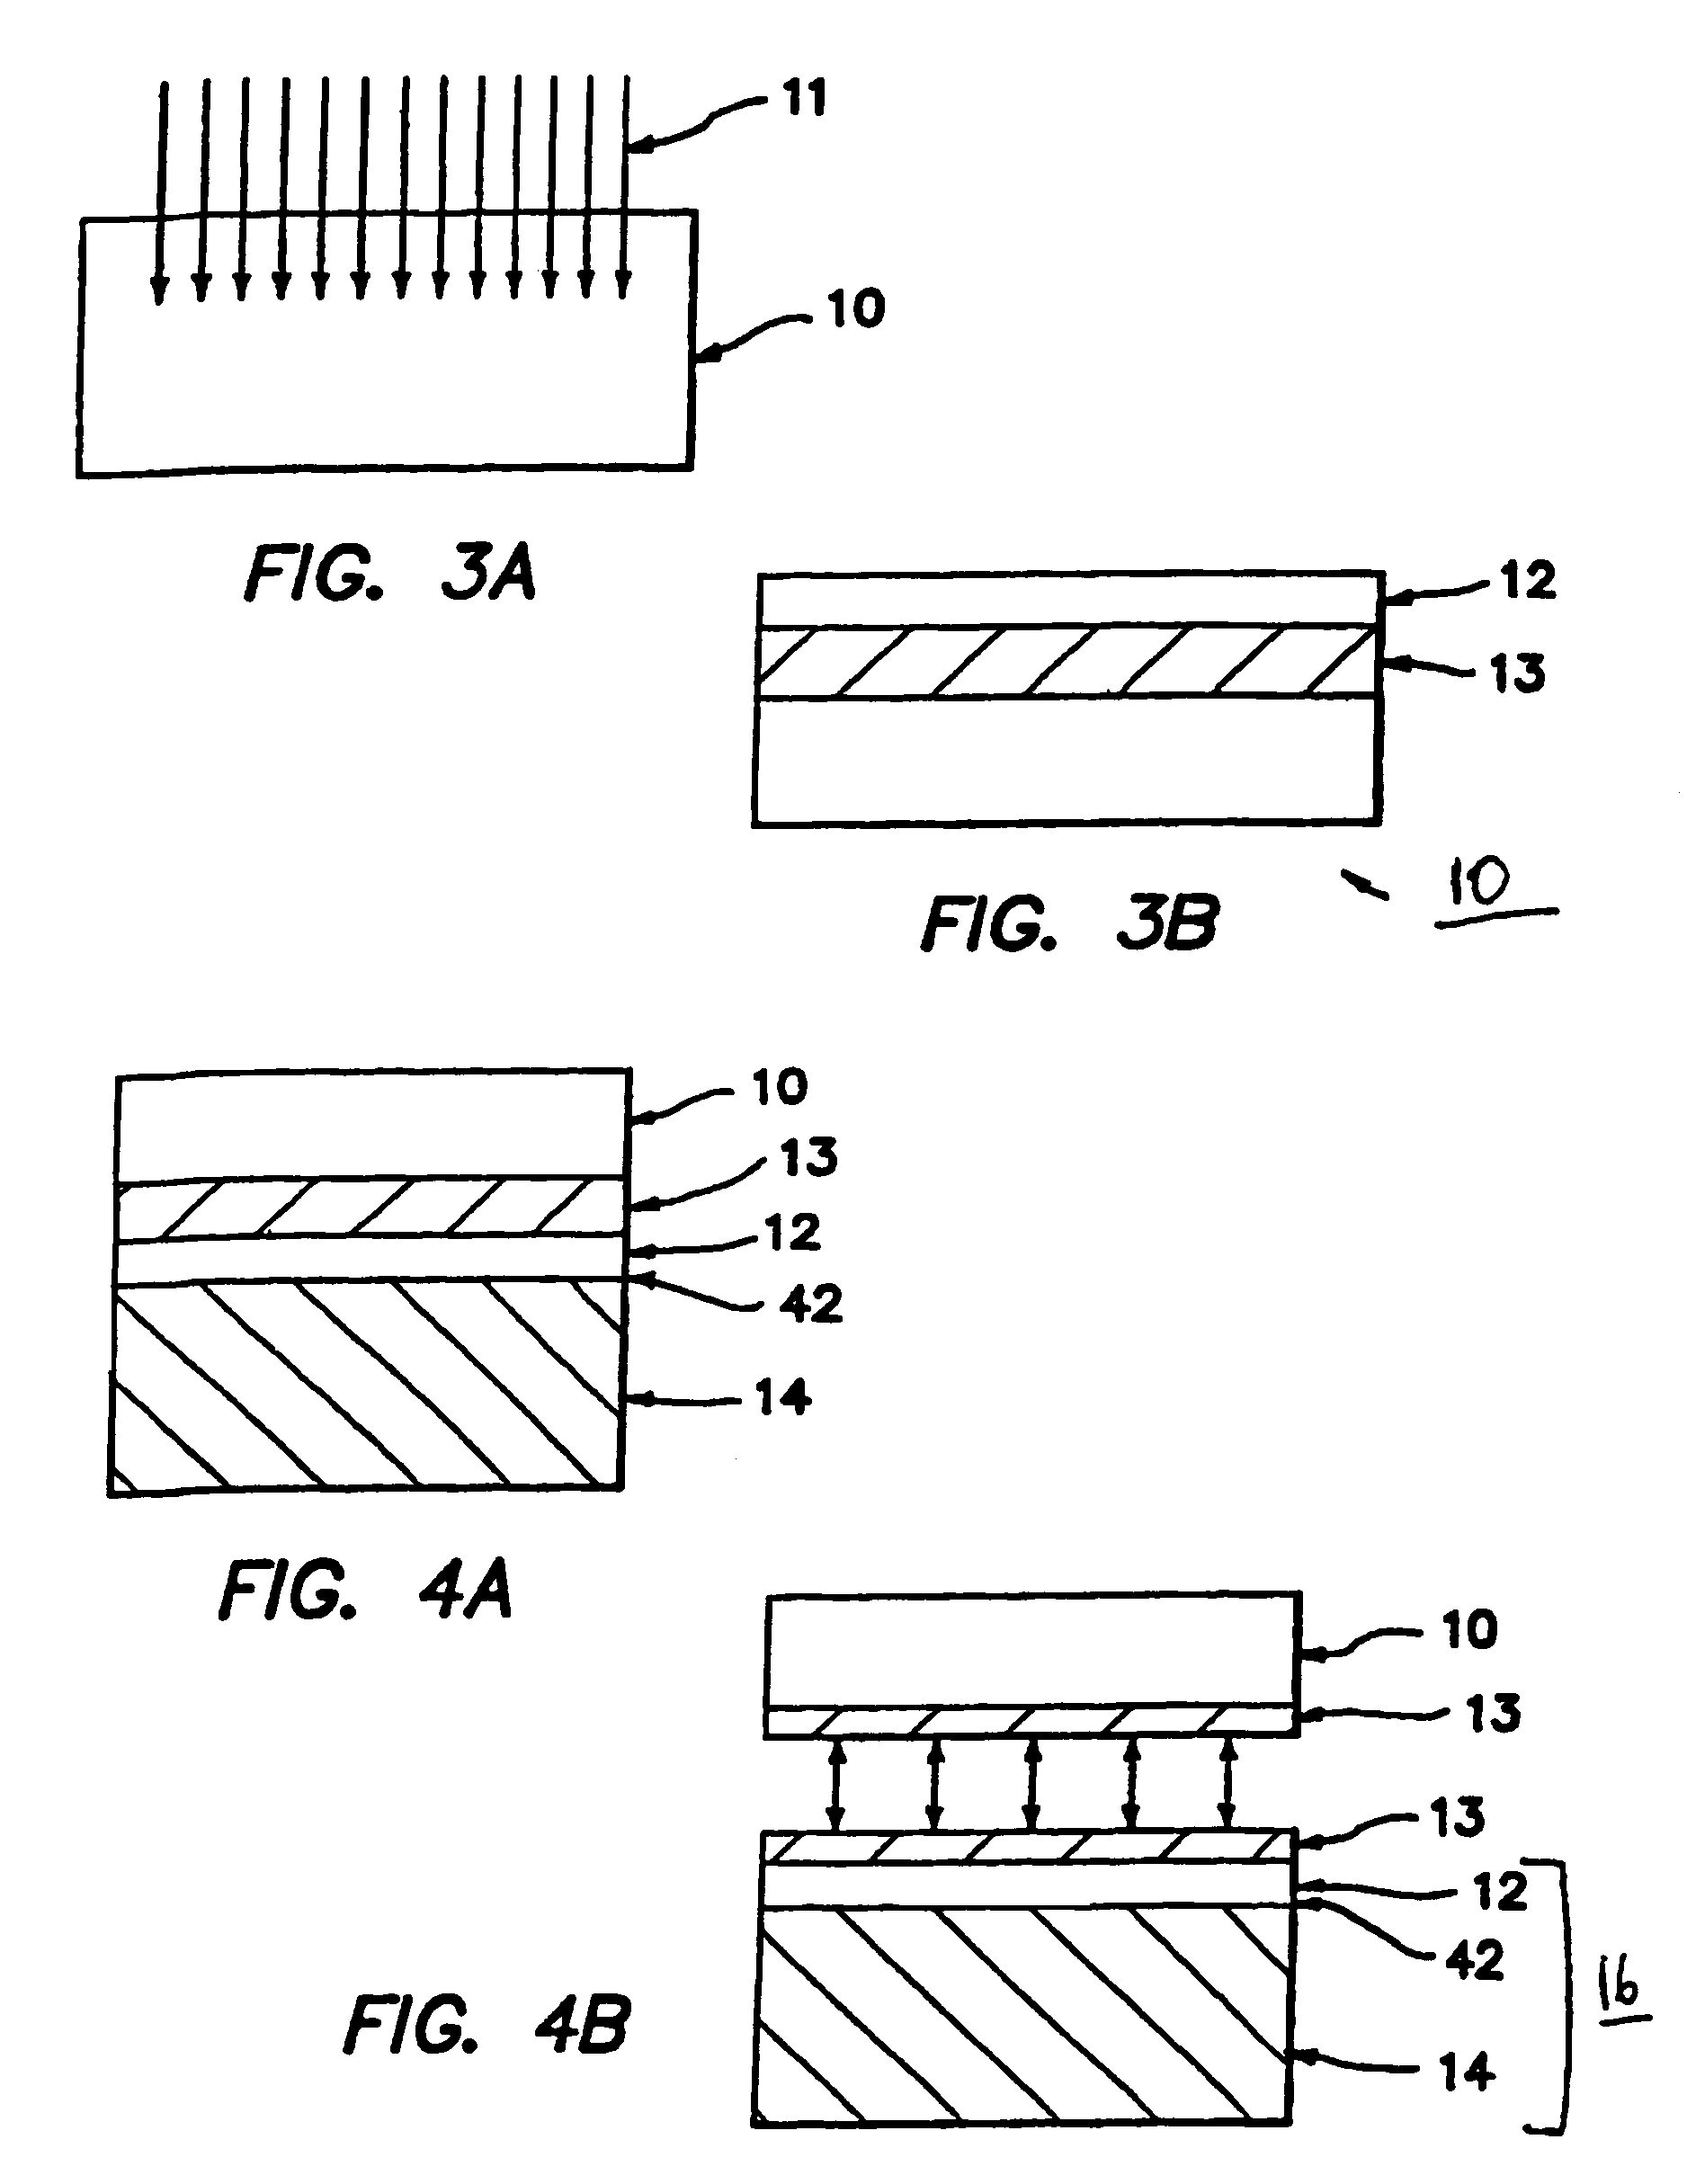 Wafer bonded virtual substrate and method for forming the same